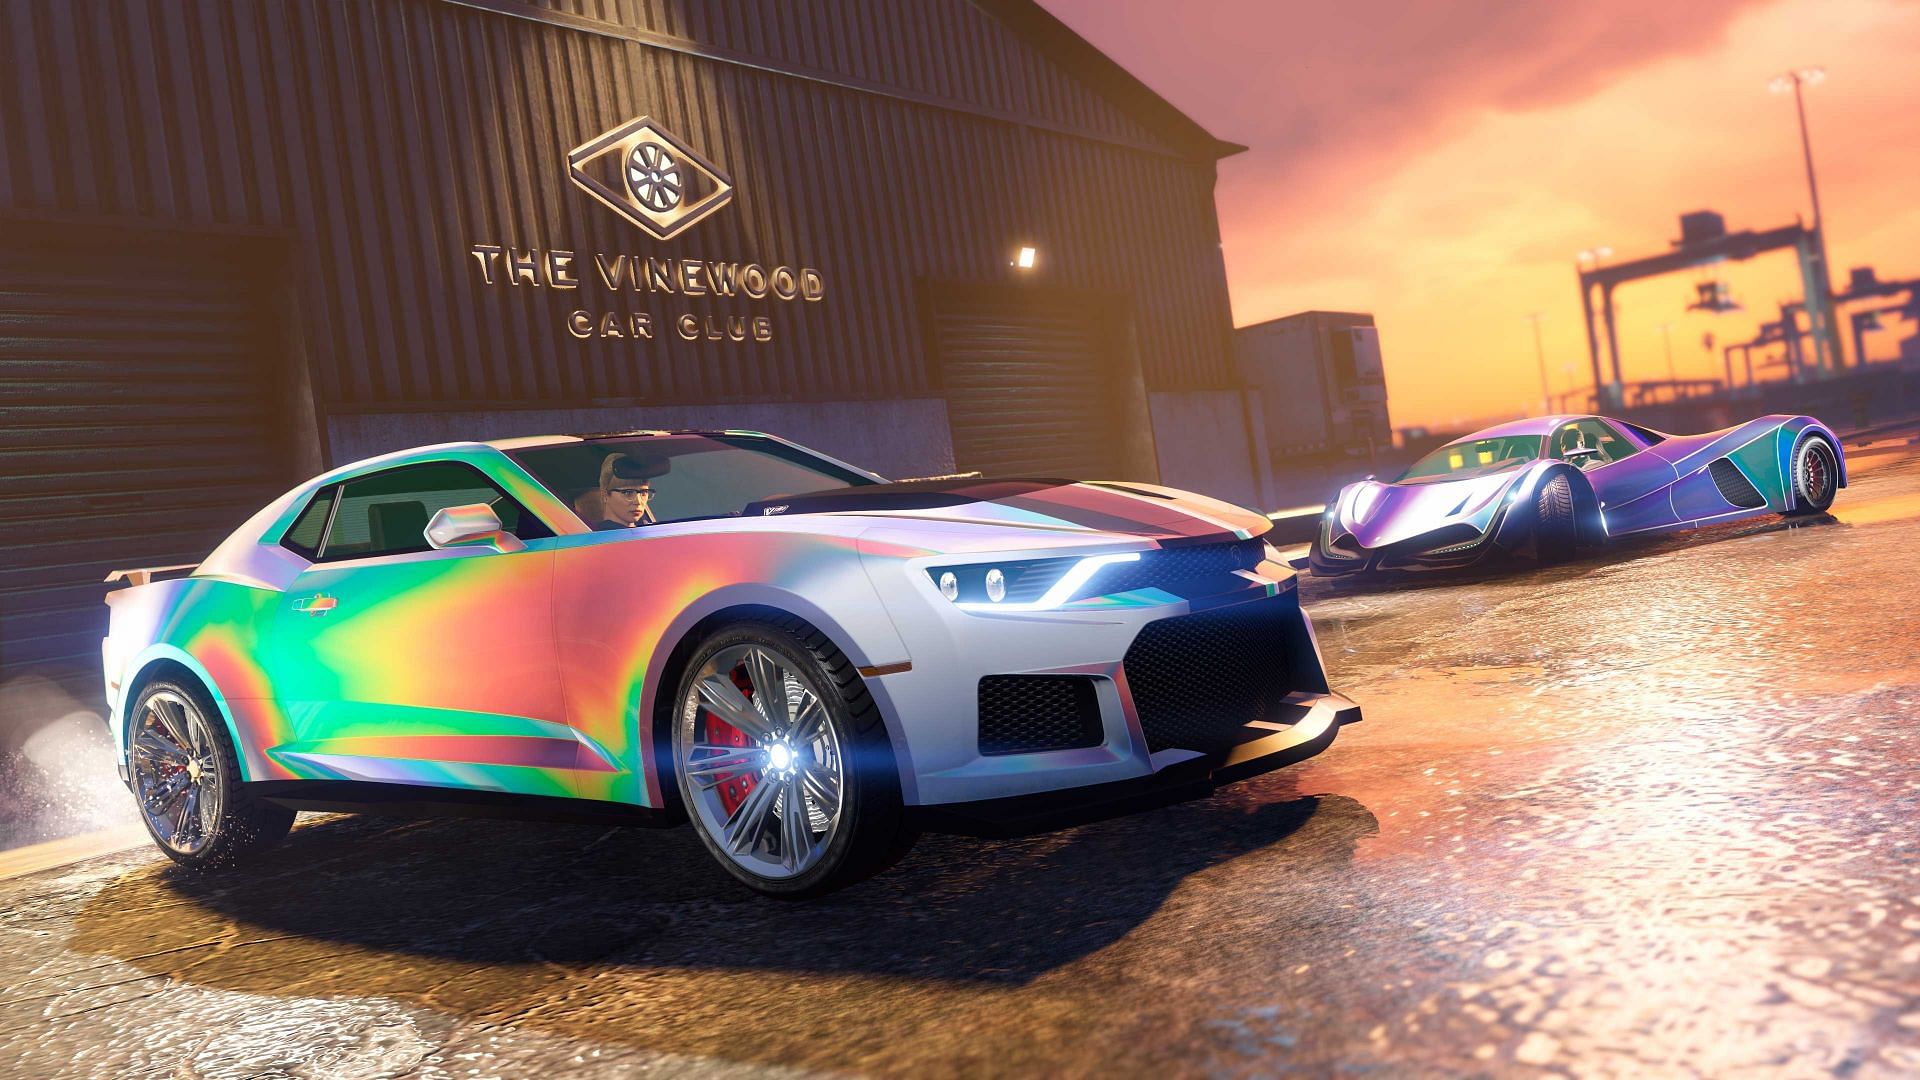 Another official screenshot tied to The Vinewood Car Club (Image via Rockstar Games)